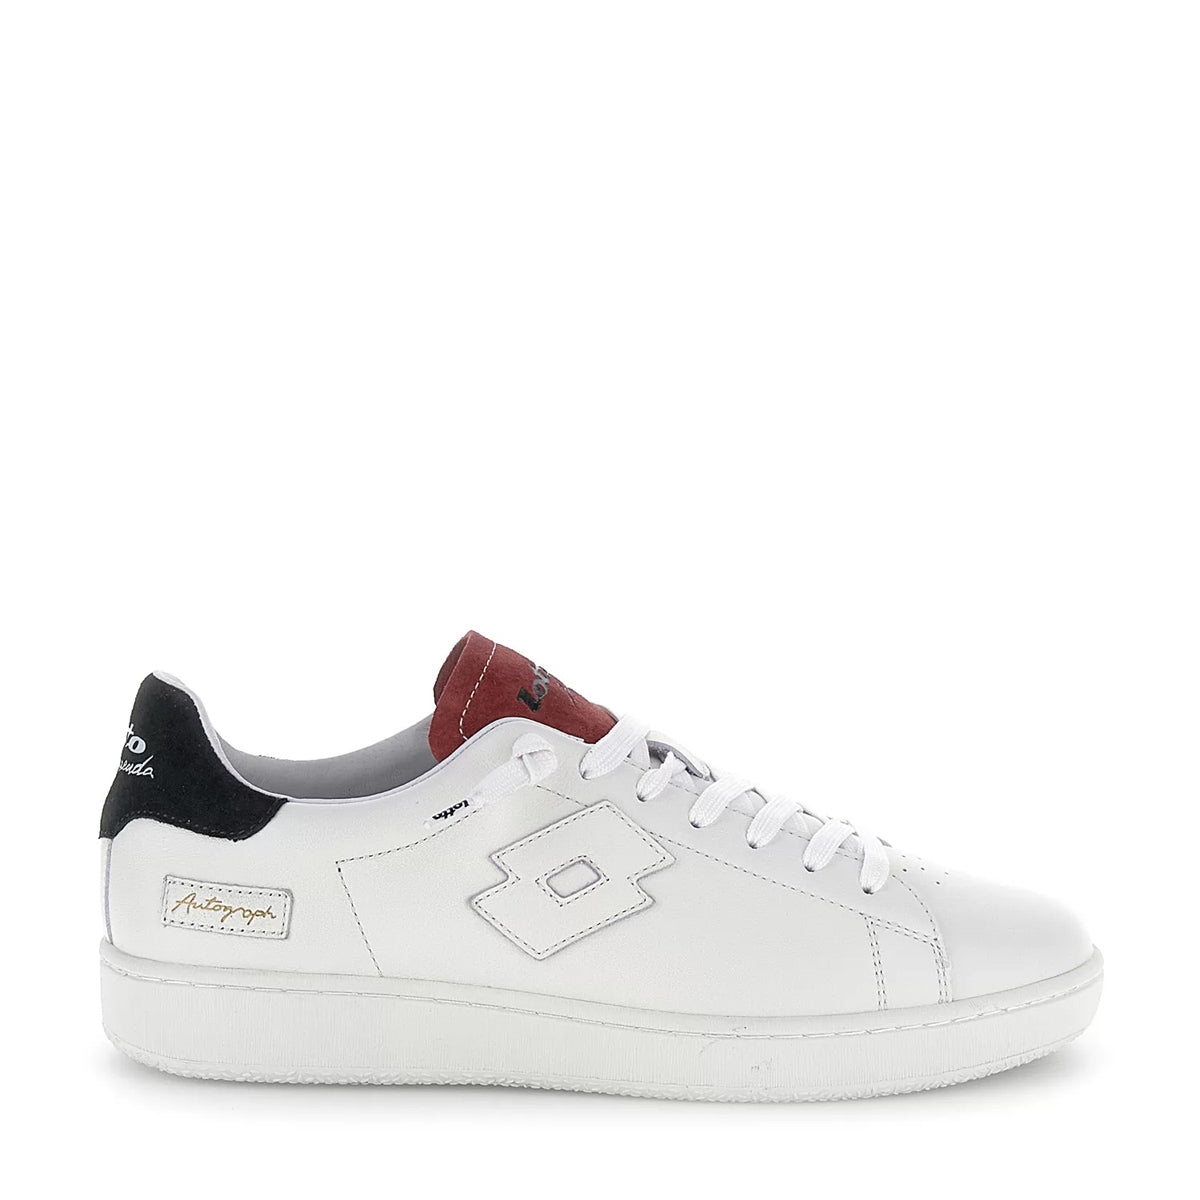 Lotto - Sneakers Autograph Suede White All Black Dried Tomato - 220317 - WHITE/ALL/BLACK/DRIED/TOMATO